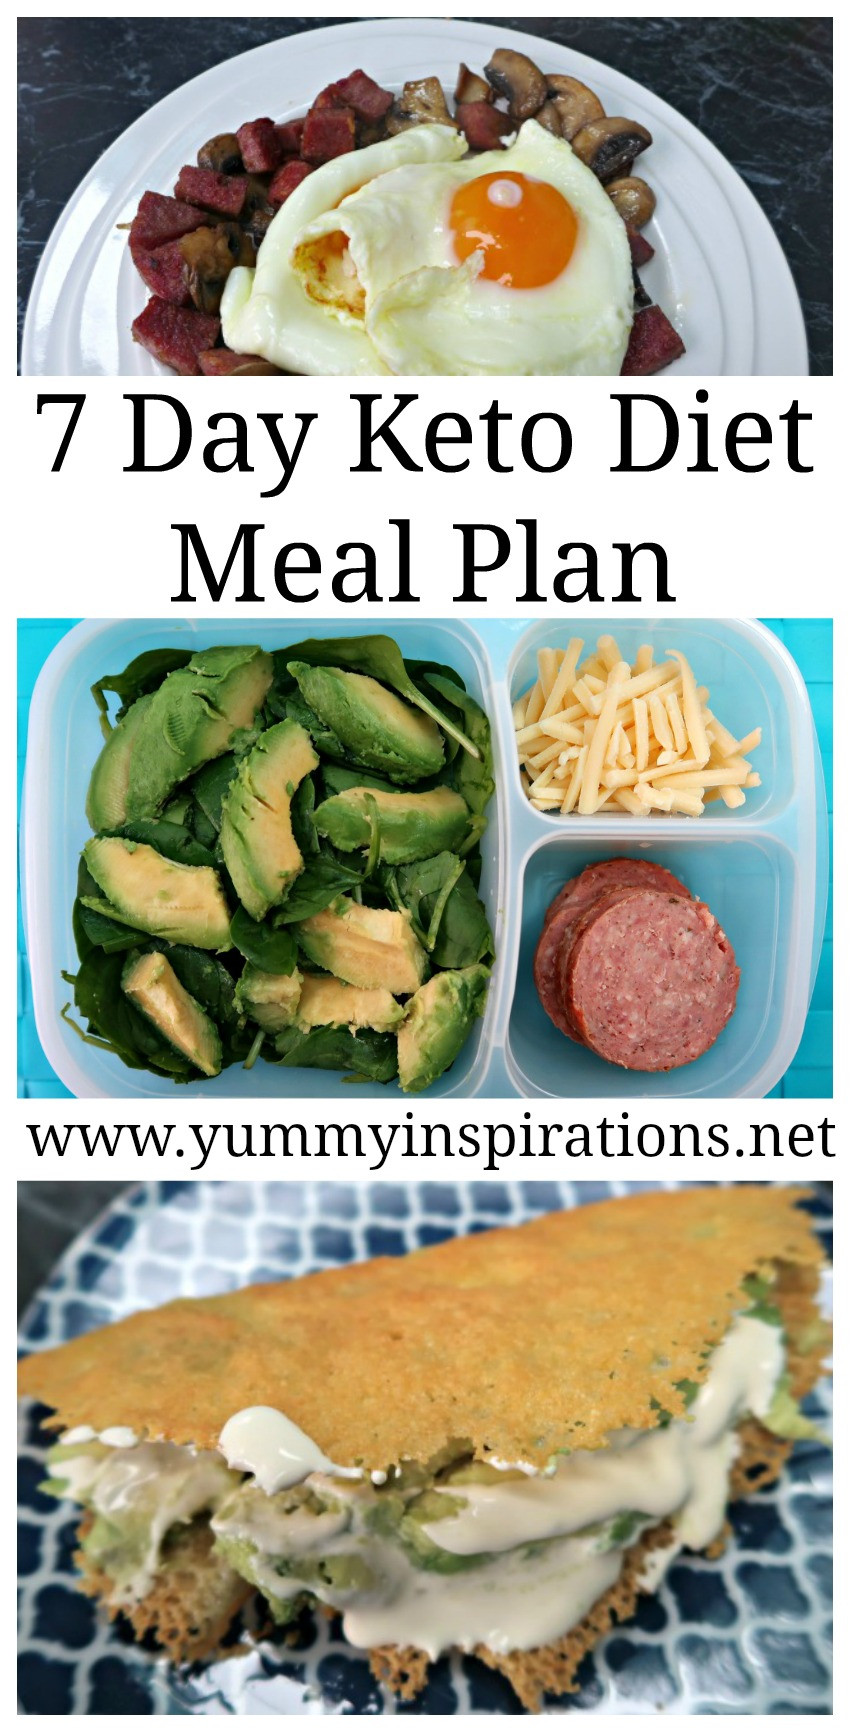 Low Carb Keto Meal Plan
 7 Day Keto Diet Meal Plan Menu For Weight Loss Ketogenic